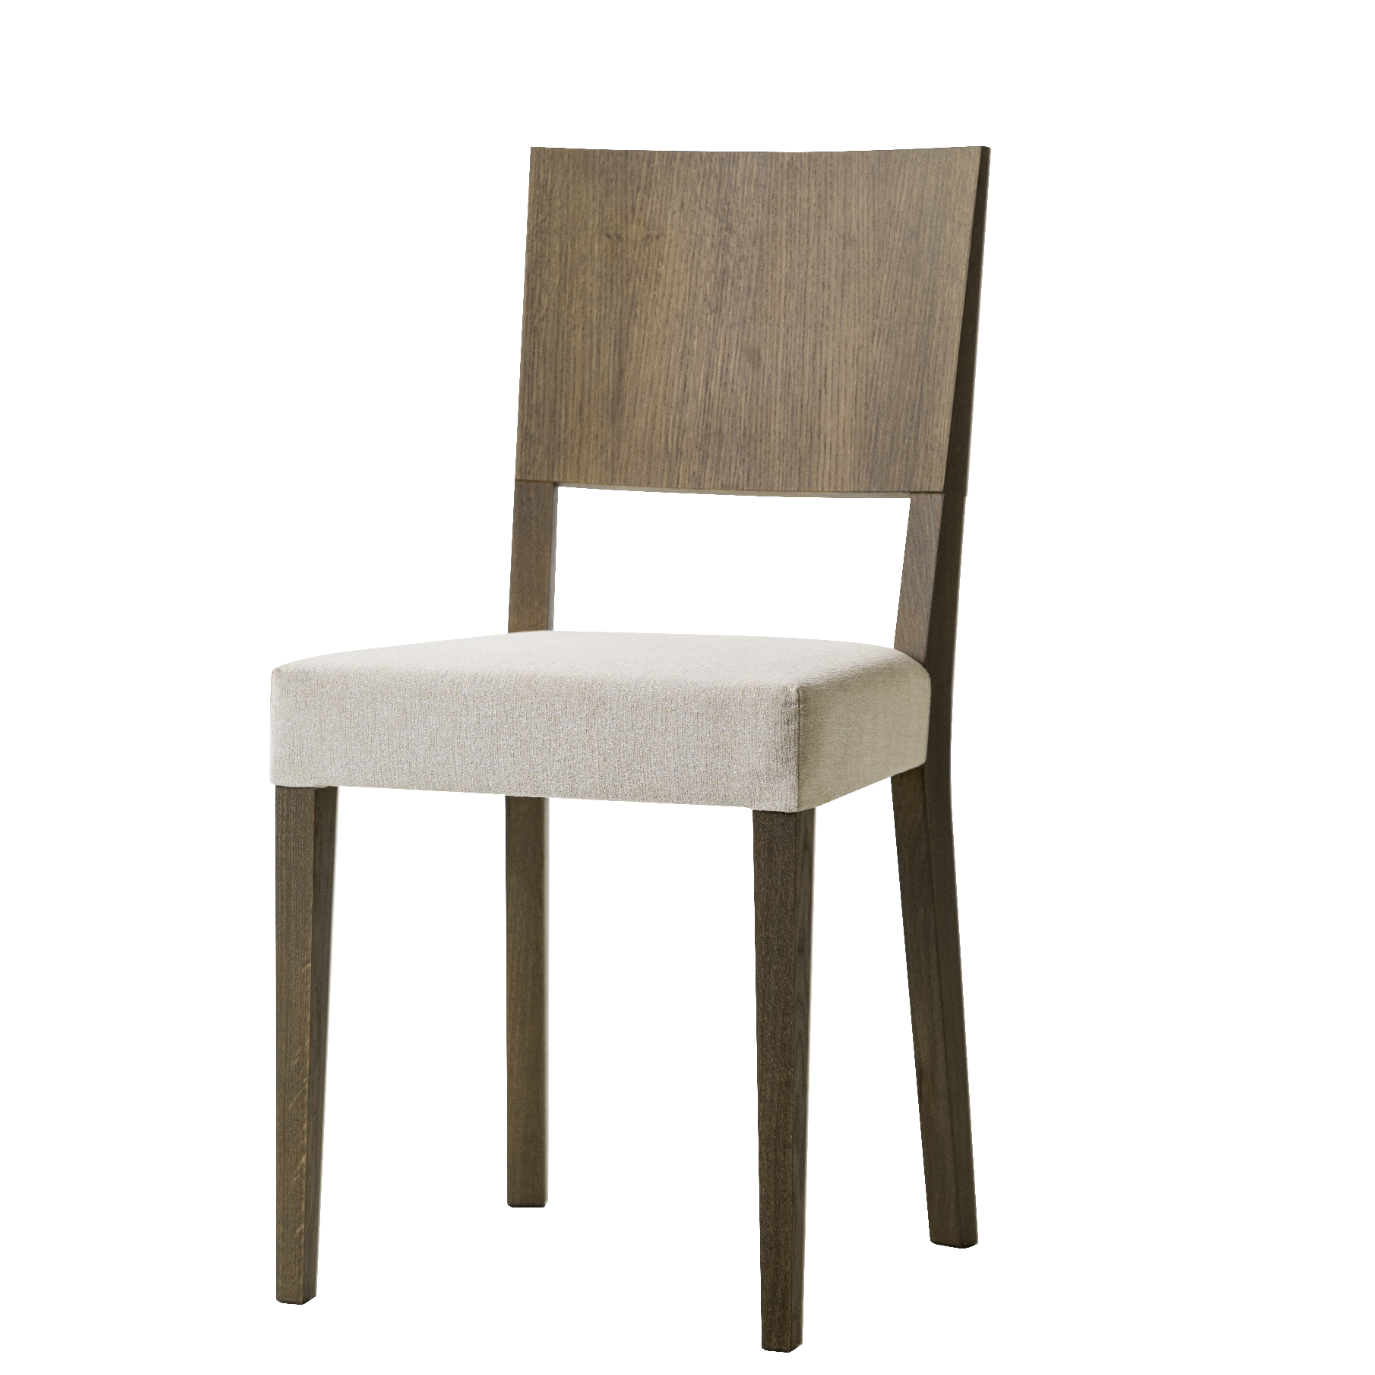 EDITA CHAIR with upholstered aprons